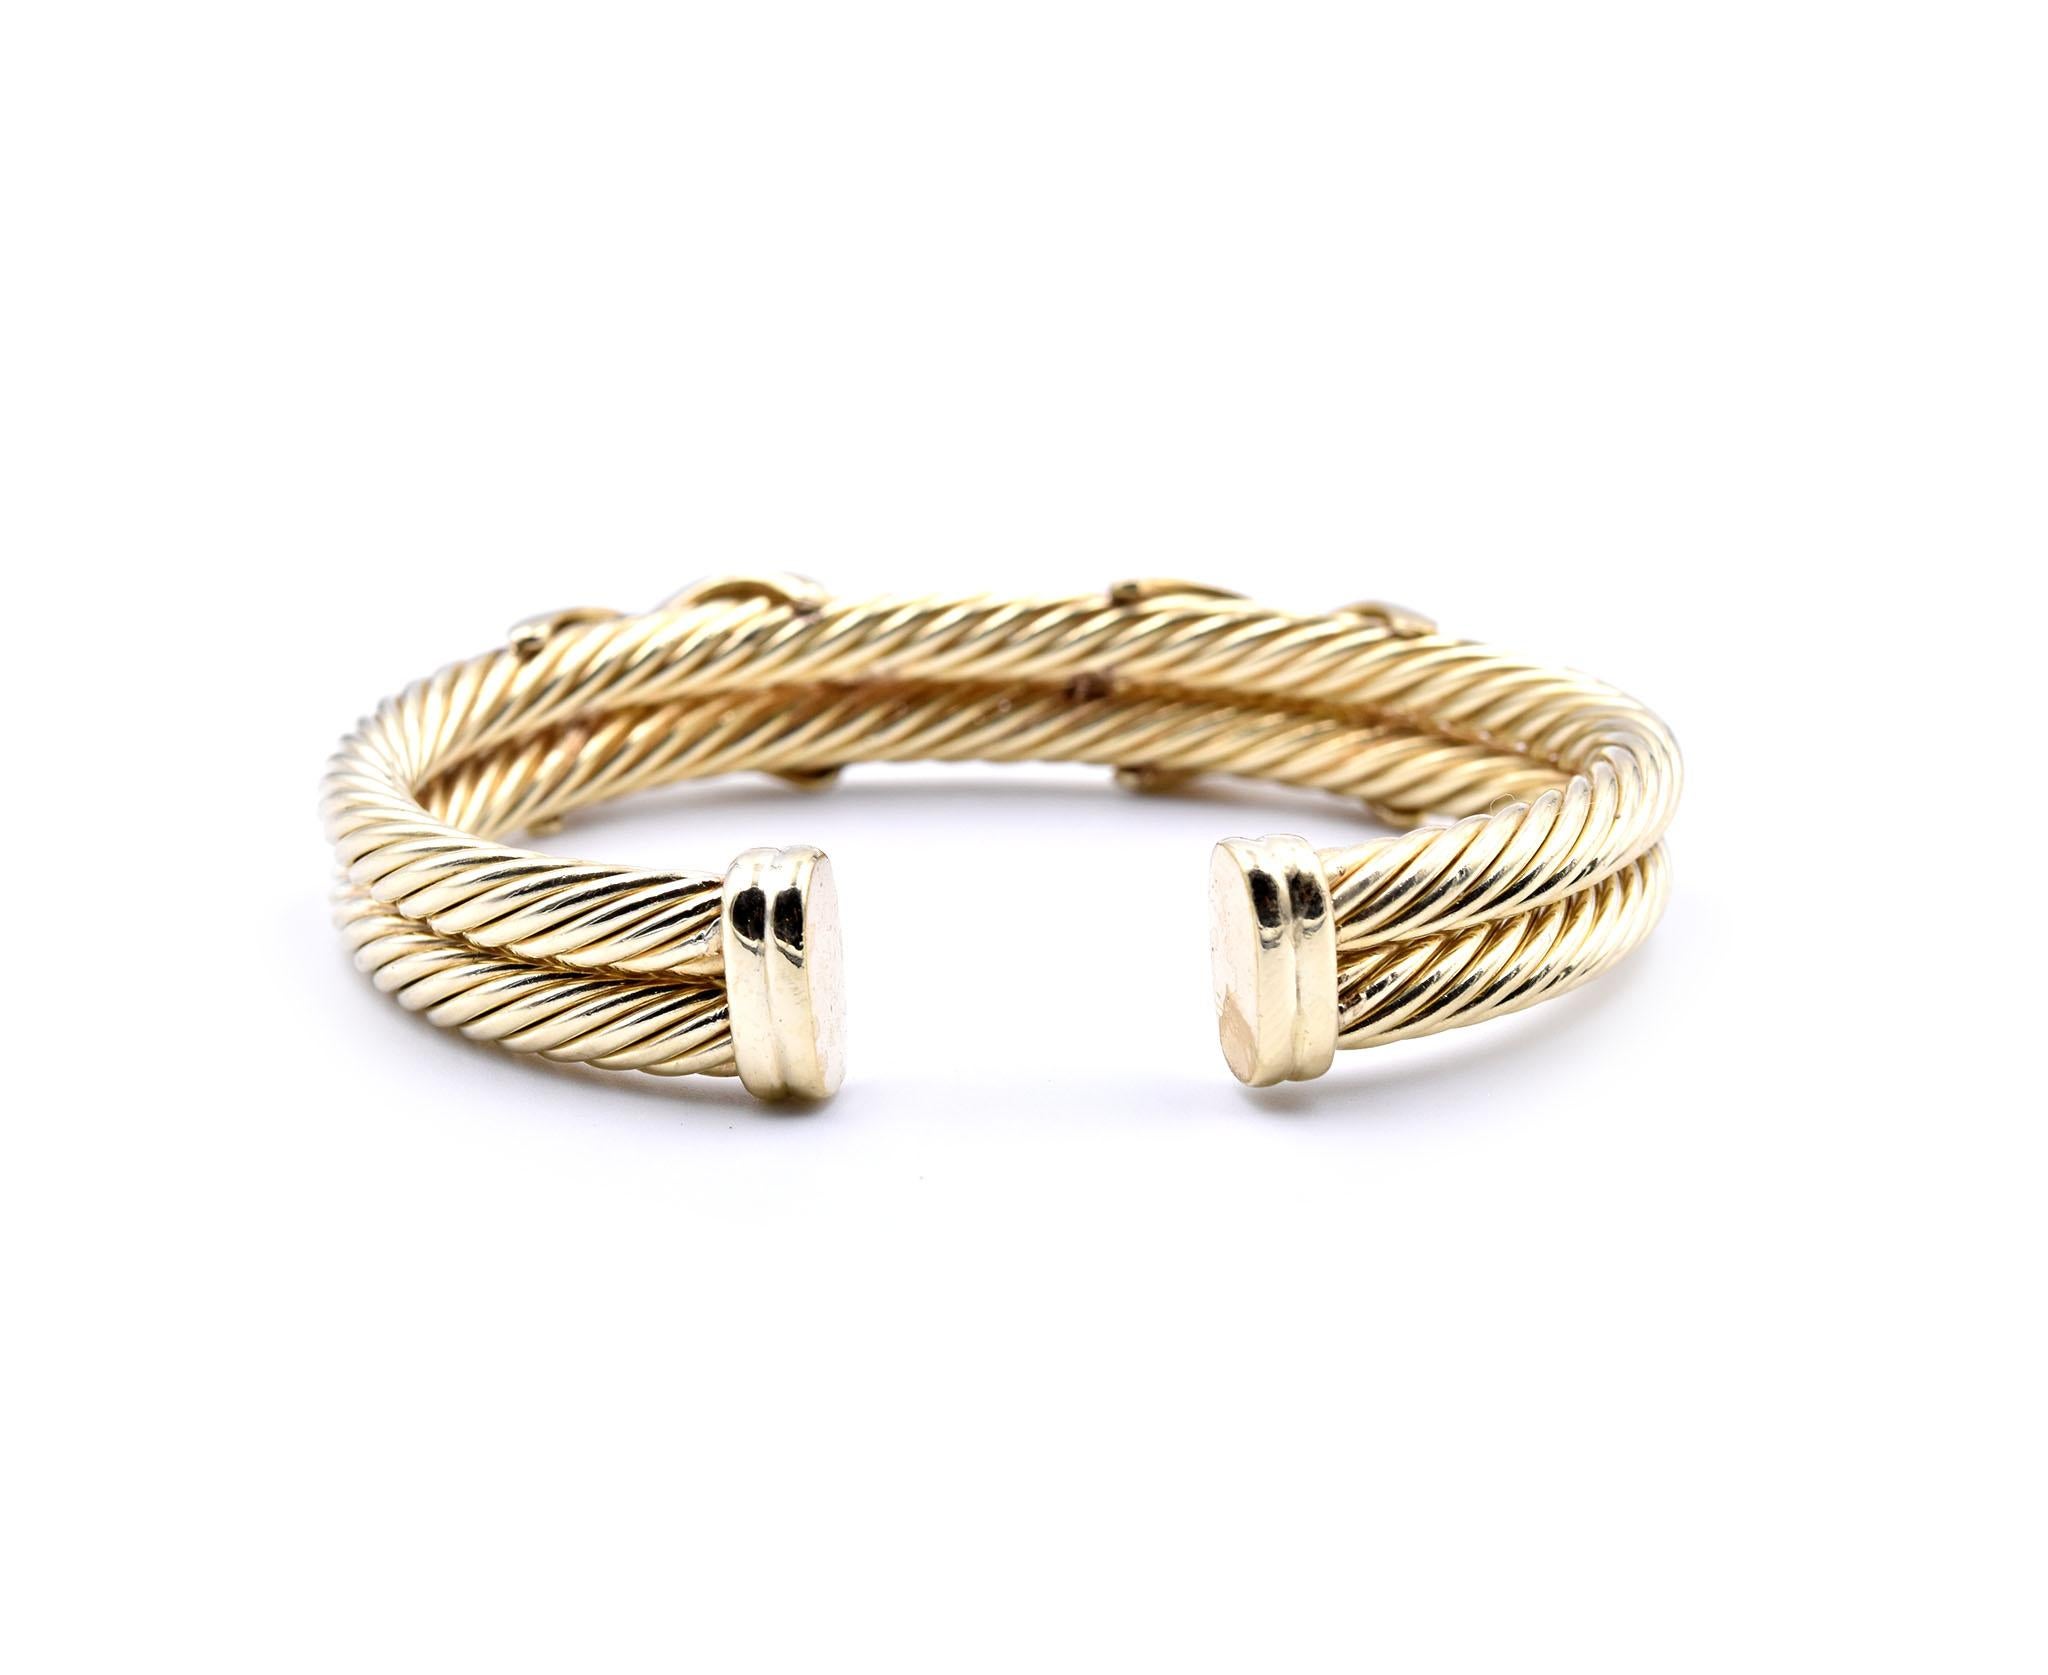 Designer: David Yurman
Material: 14k yellow gold
Diamonds: 10 round brilliant cuts = 0.50cttw
Color: G
Clarity: VS
Dimensions: bracelet will fit up to a 6-inch wrist
Weight: 33.29 grams
